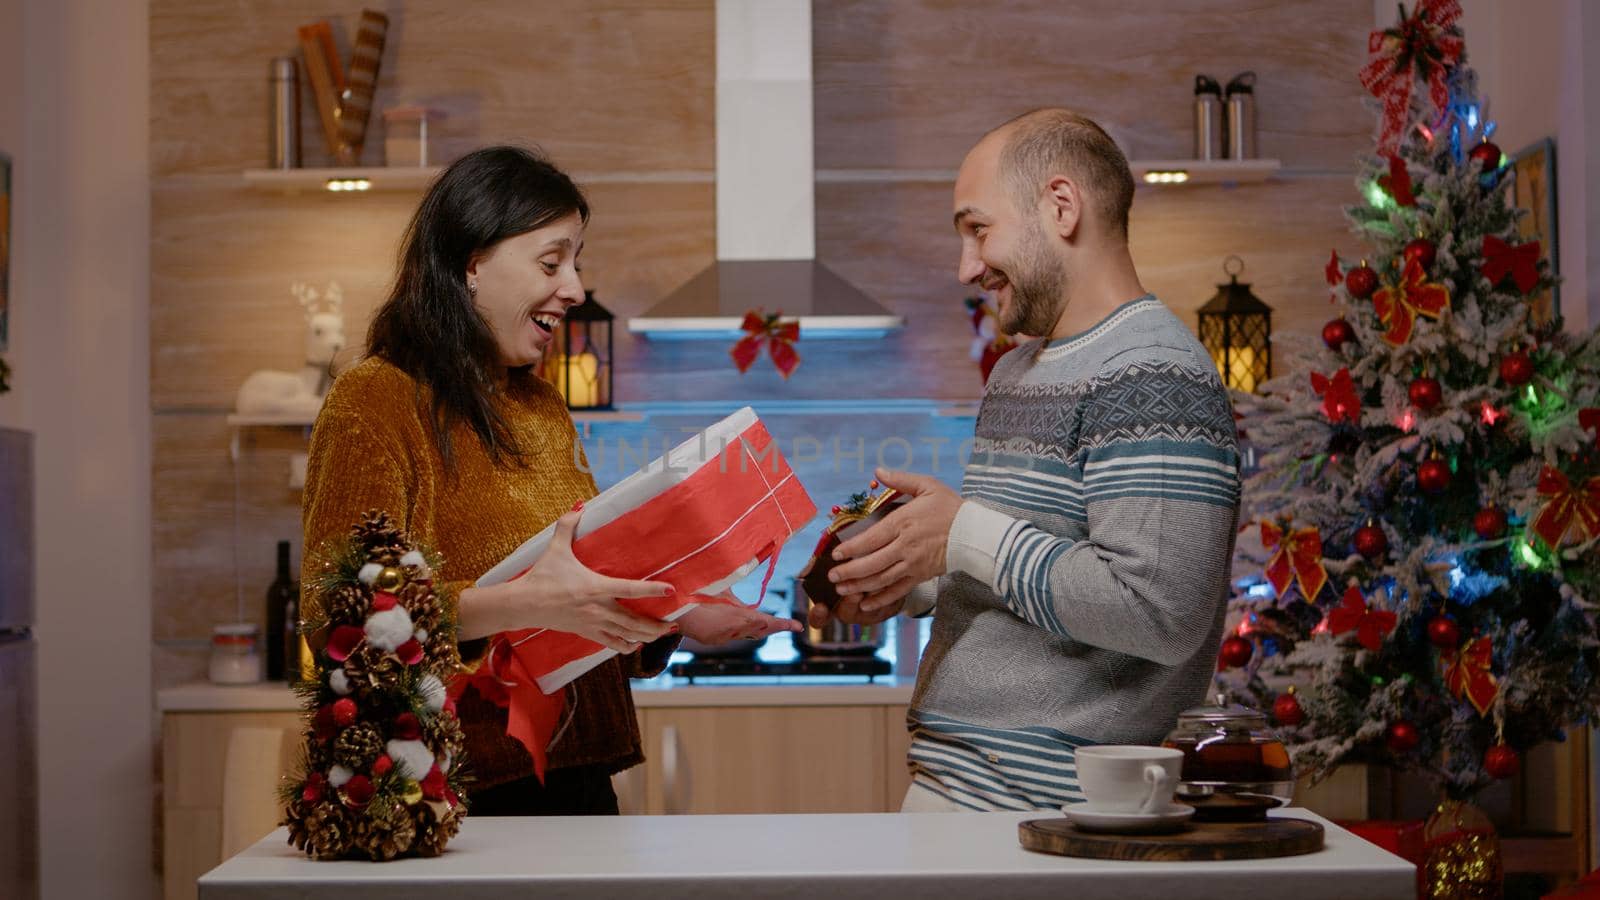 Cheerful couple exchanging presents on christmas eve day by DCStudio